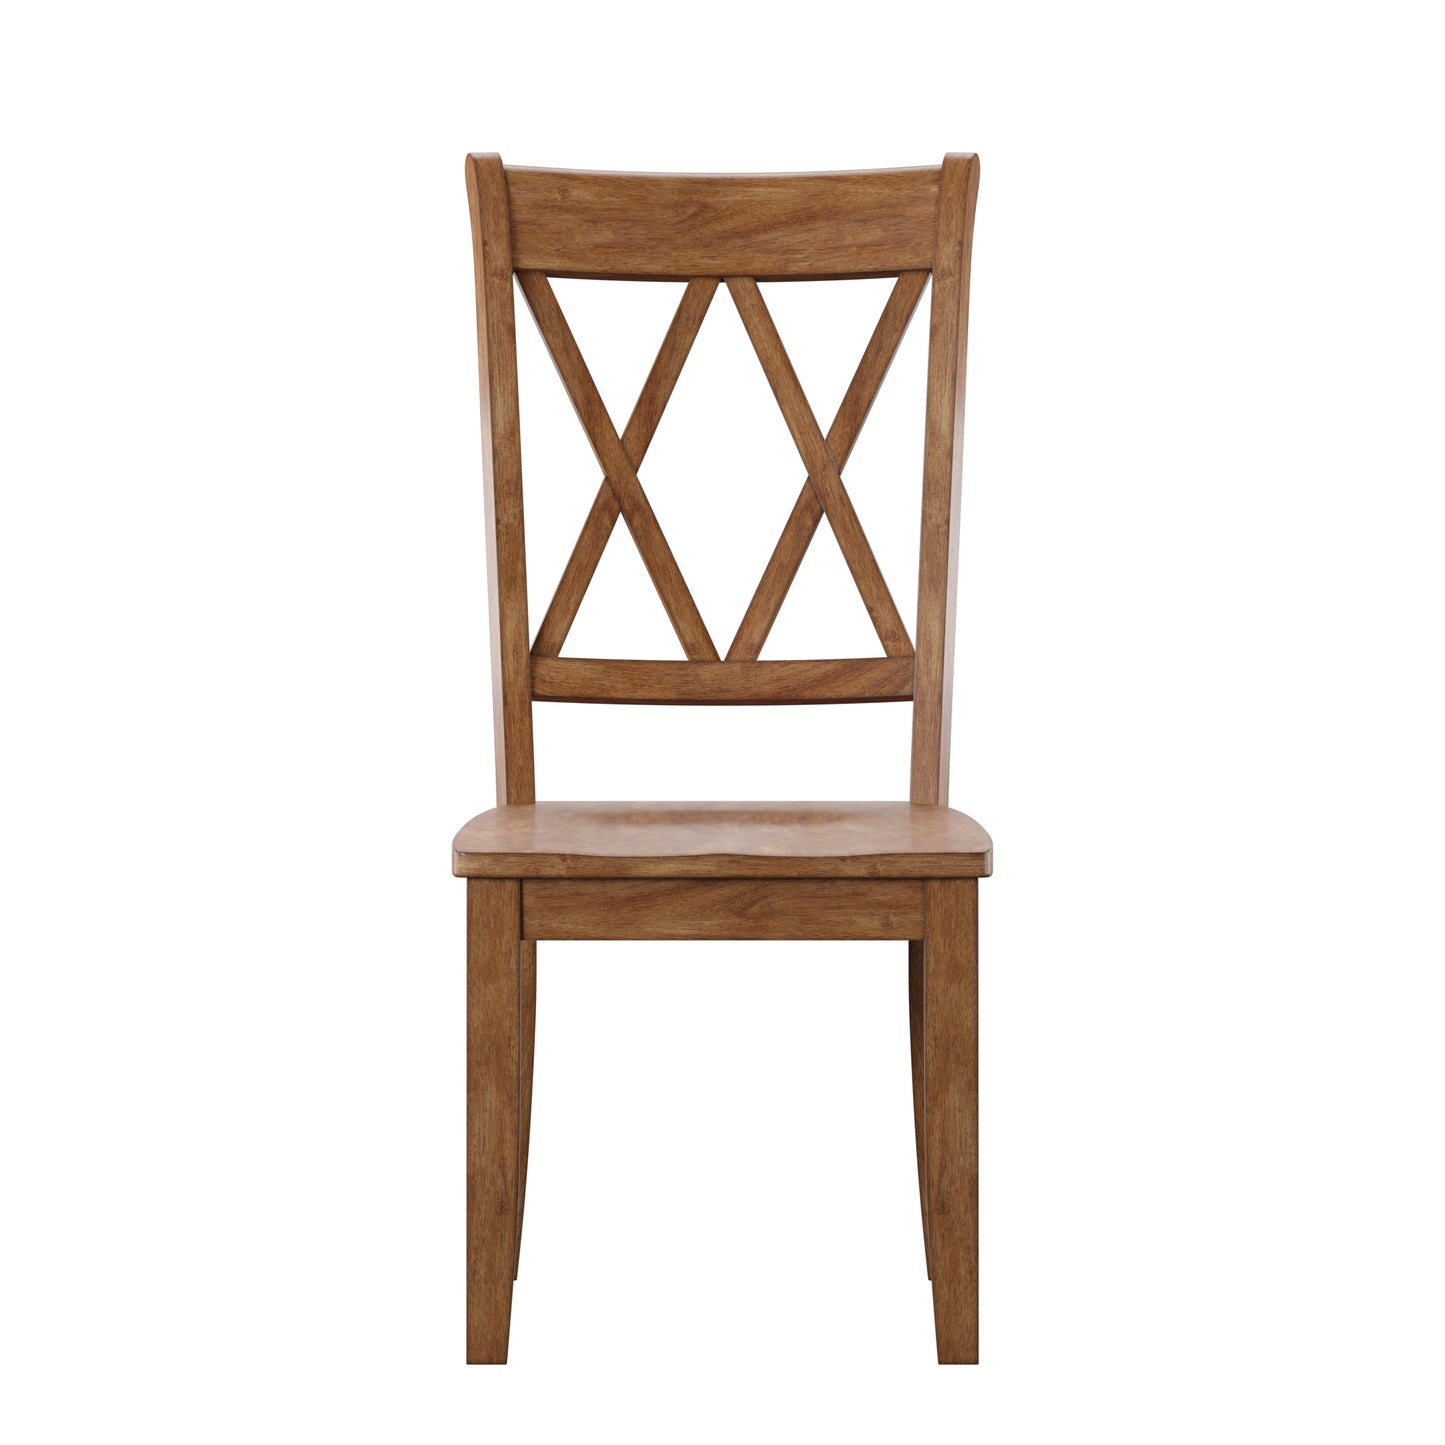 Double X Back Wood Dining Chairs (Set of 2) - Oak Finish